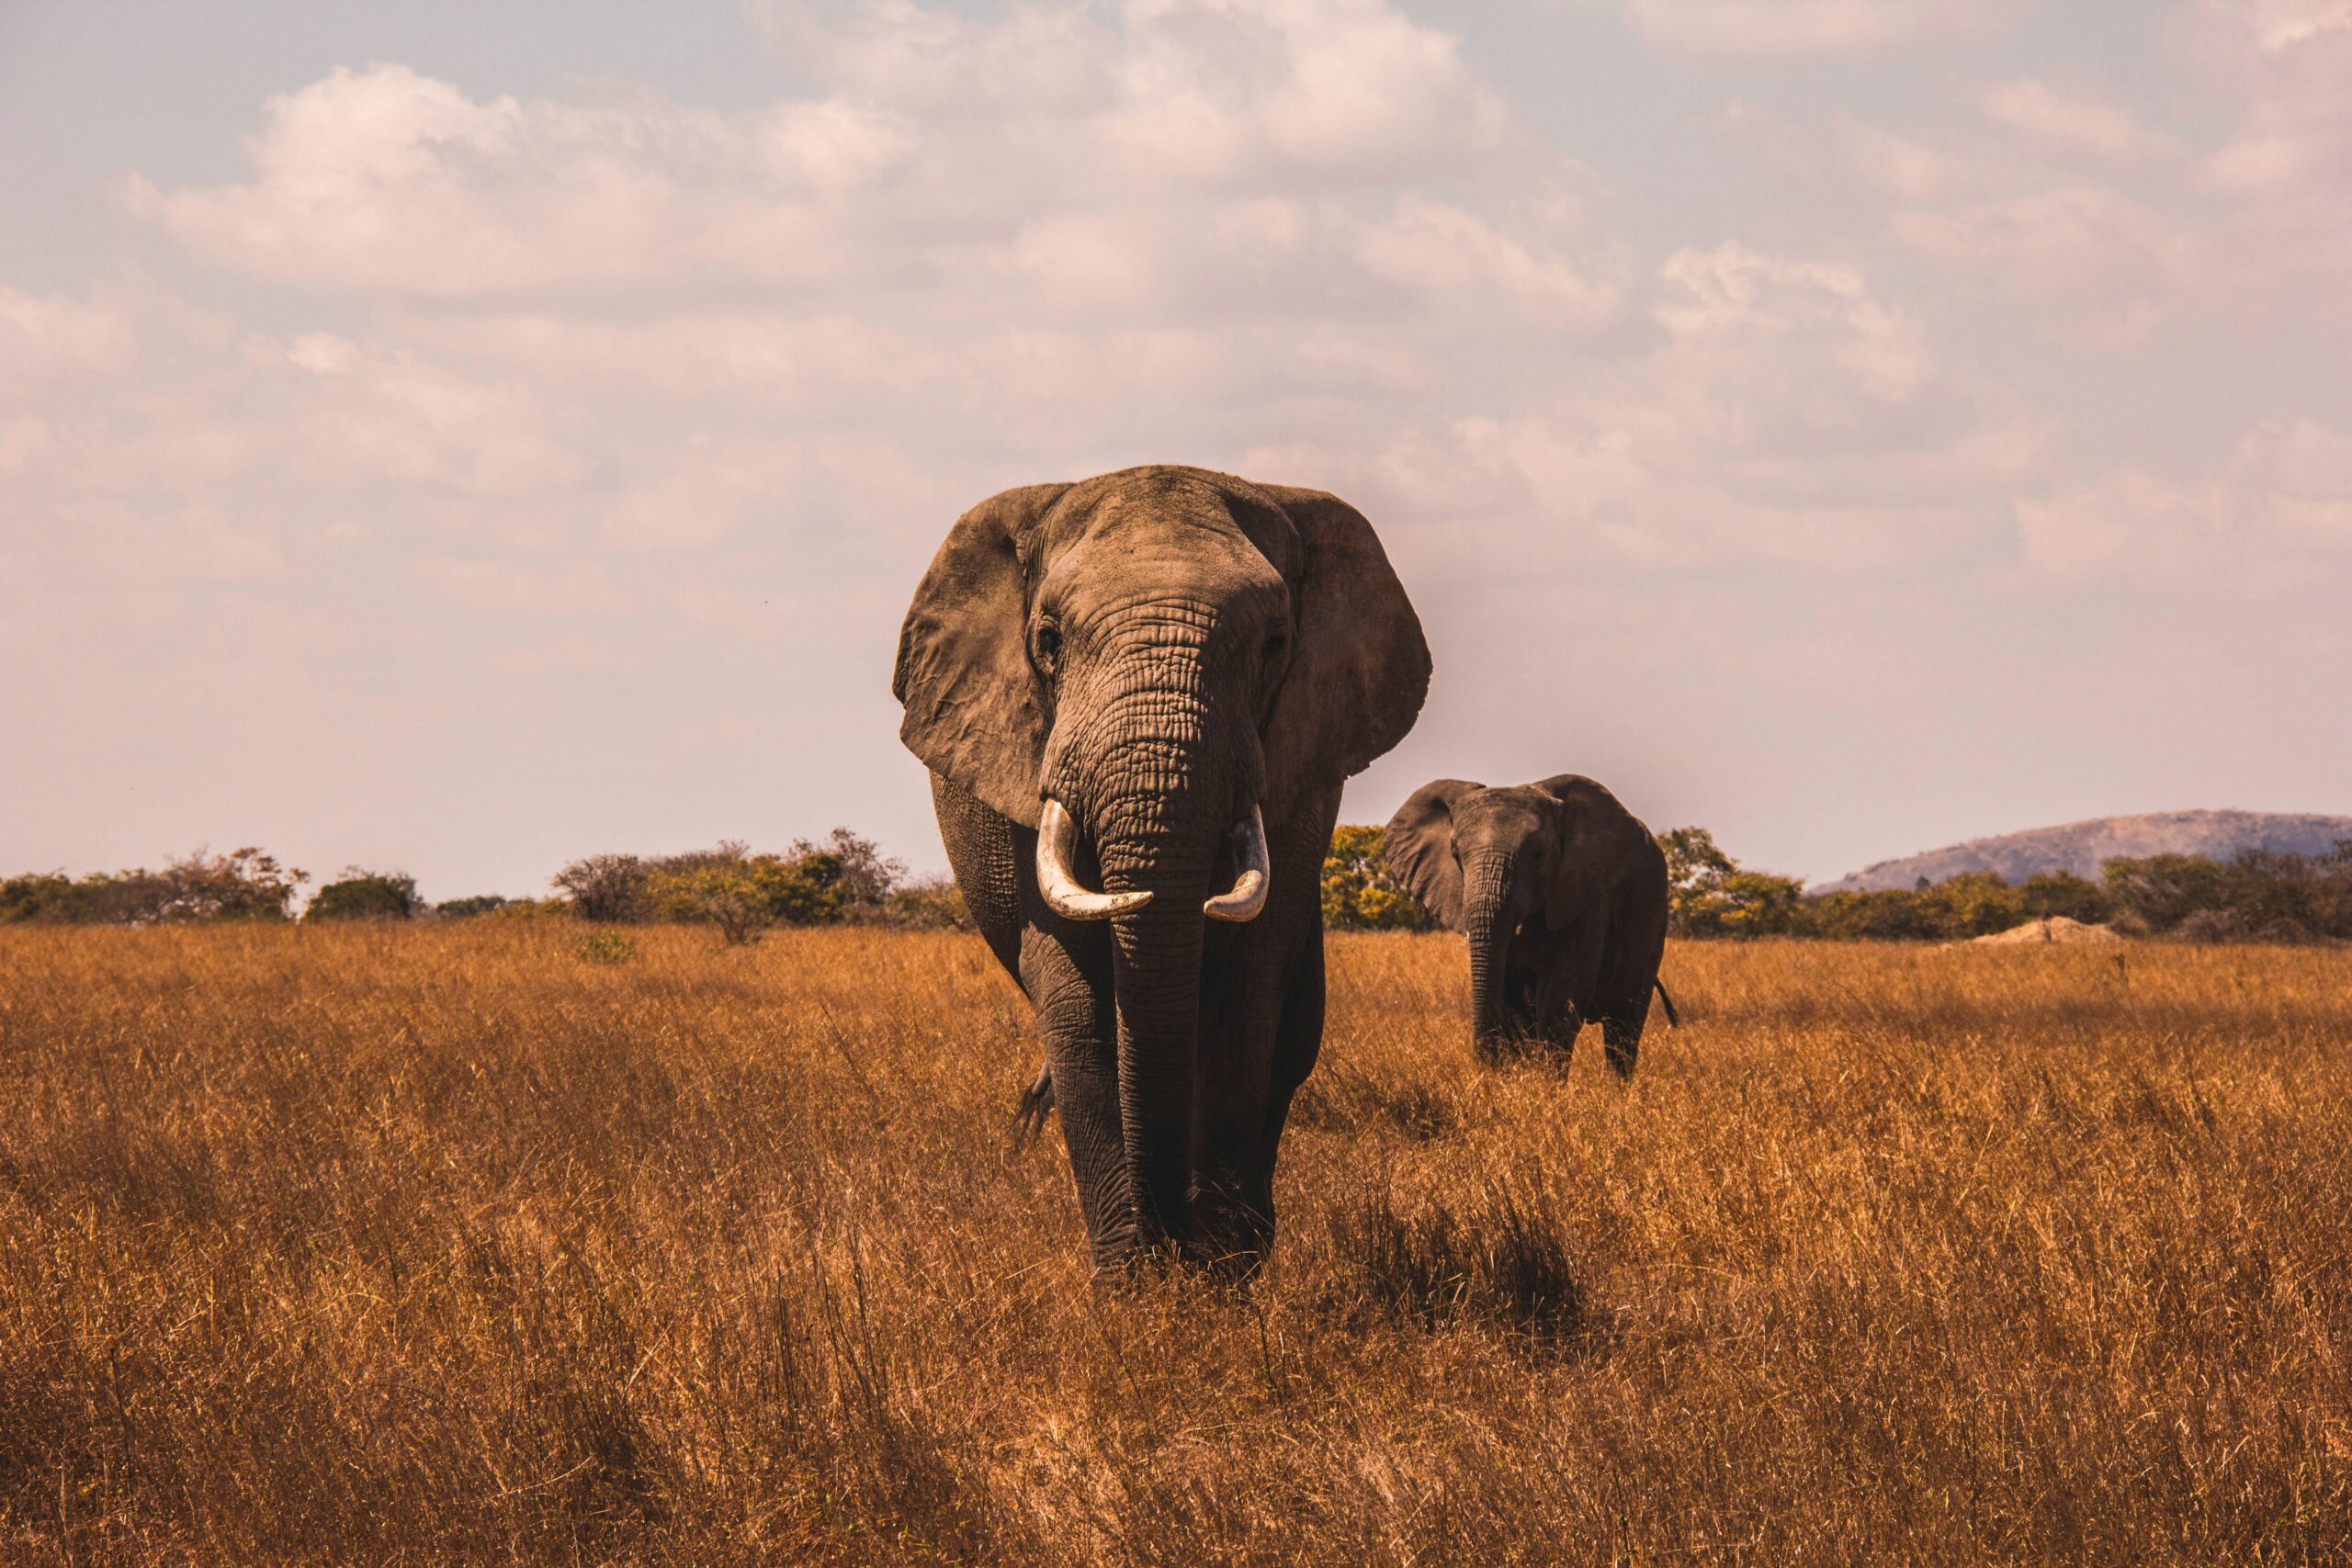 The wildlife sighting available in Tanzania during July make a trip irresistible. 
Pictured: elephant in Tanzania park 